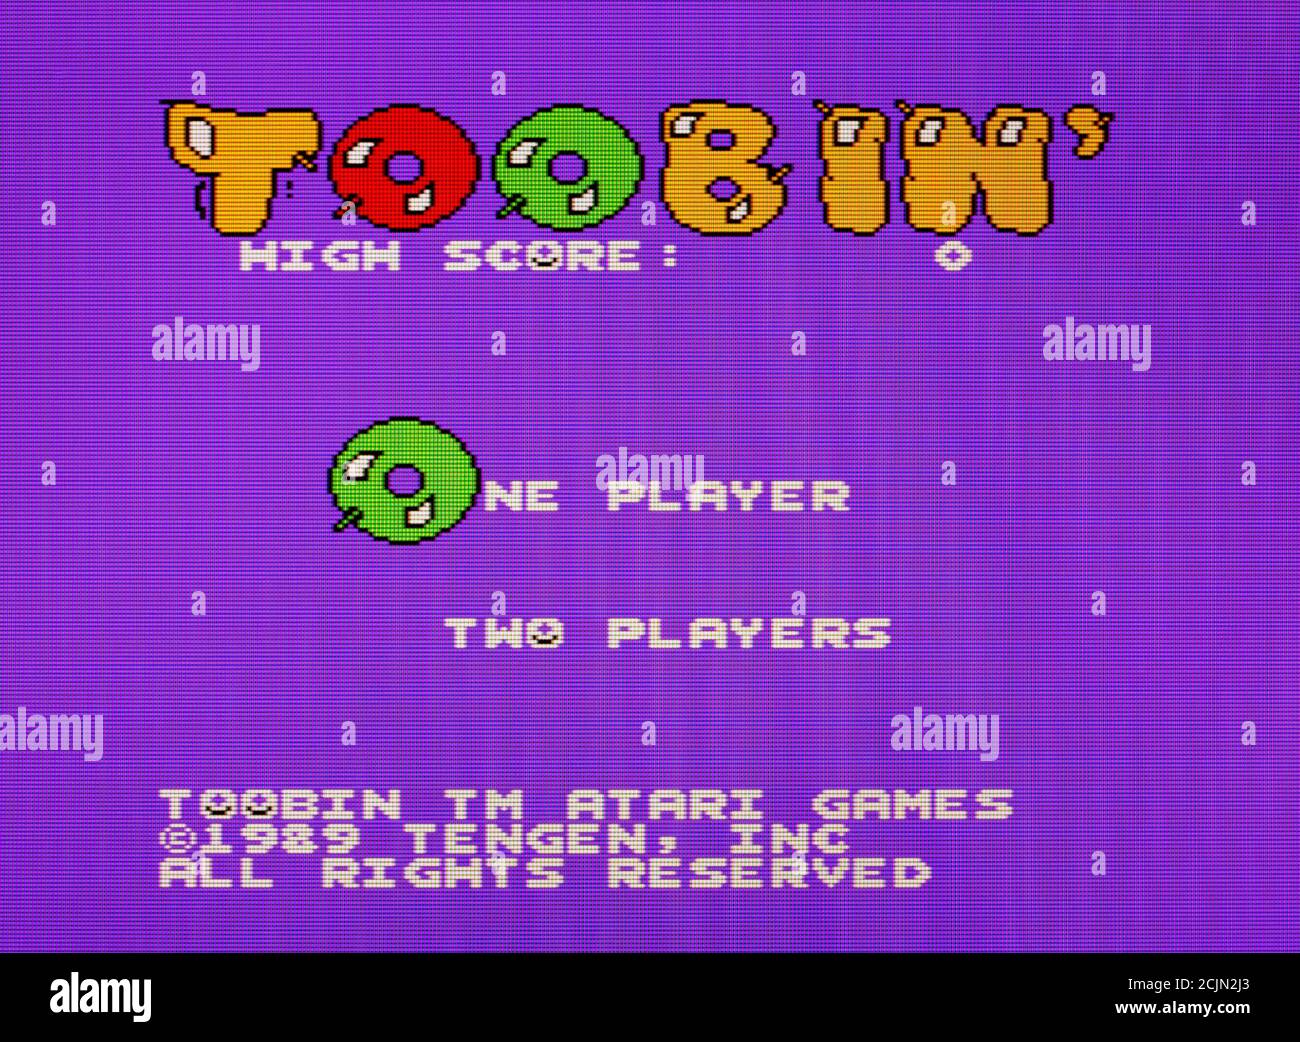 Toobin' - Nintendo Entertainment System - NES Videogame - Editorial use only Stock Photo